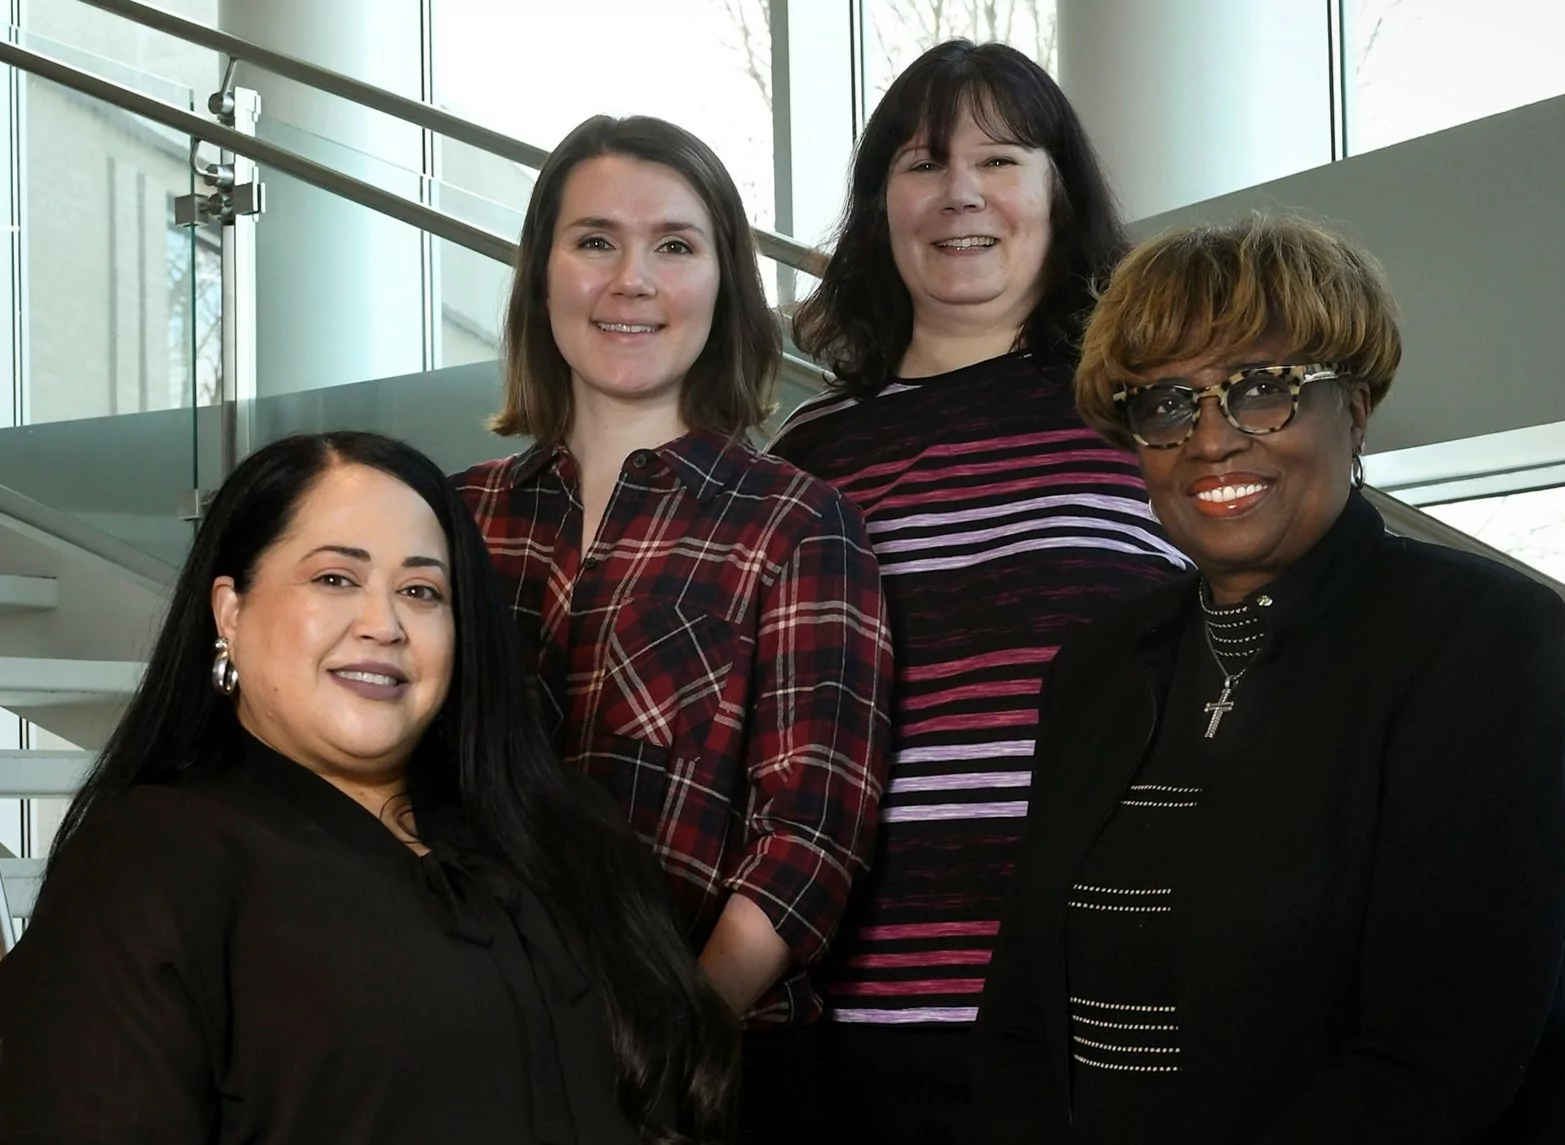 The Family Support Services team is here to help donor families through the donation process, including follow-up services long after the donation has taken place.